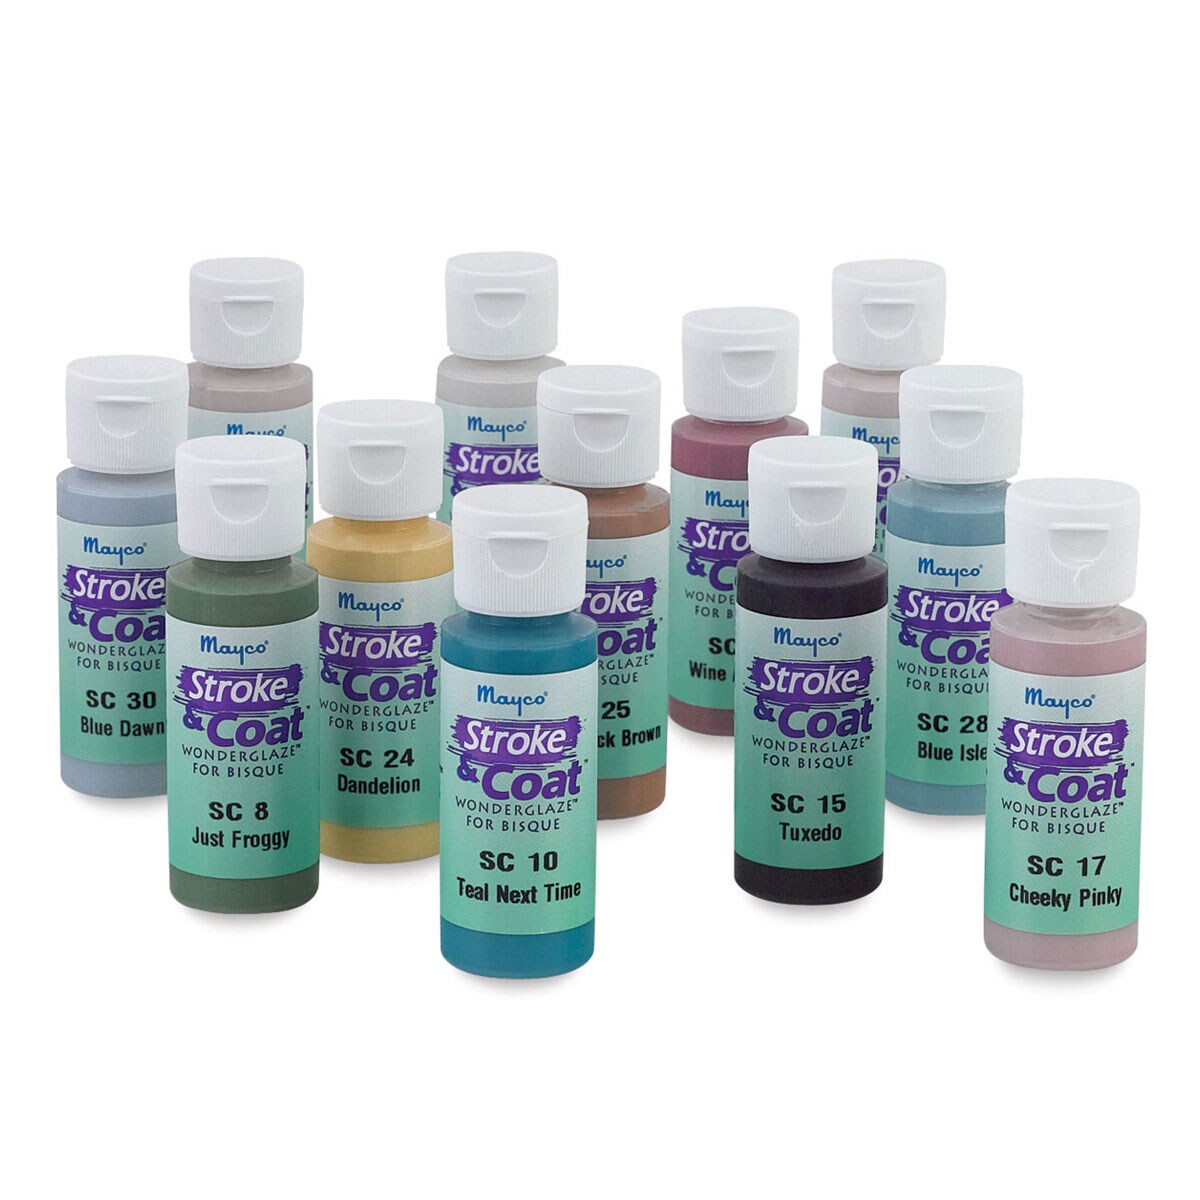 Mayco Stroke and Coat Glaze for Ceramics Kit 1, 12 Assorted 2 Oz Jars with  How